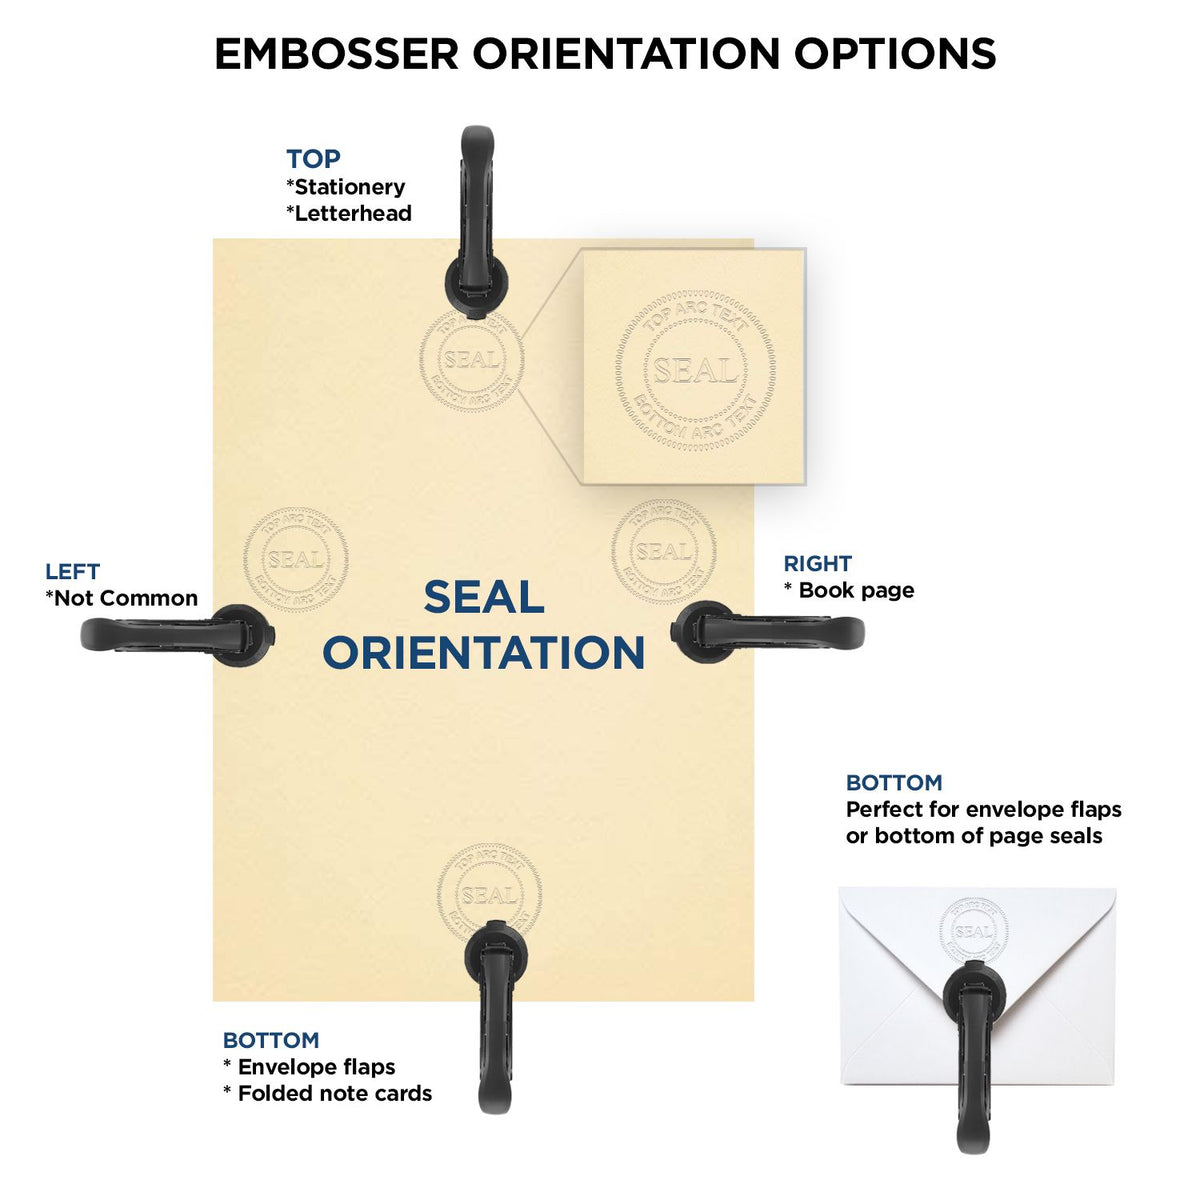 An infographic for the Heavy Duty Cast Iron Maryland Architect Embosser showing embosser orientation, this is showing examples of a top, bottom, right and left insert.